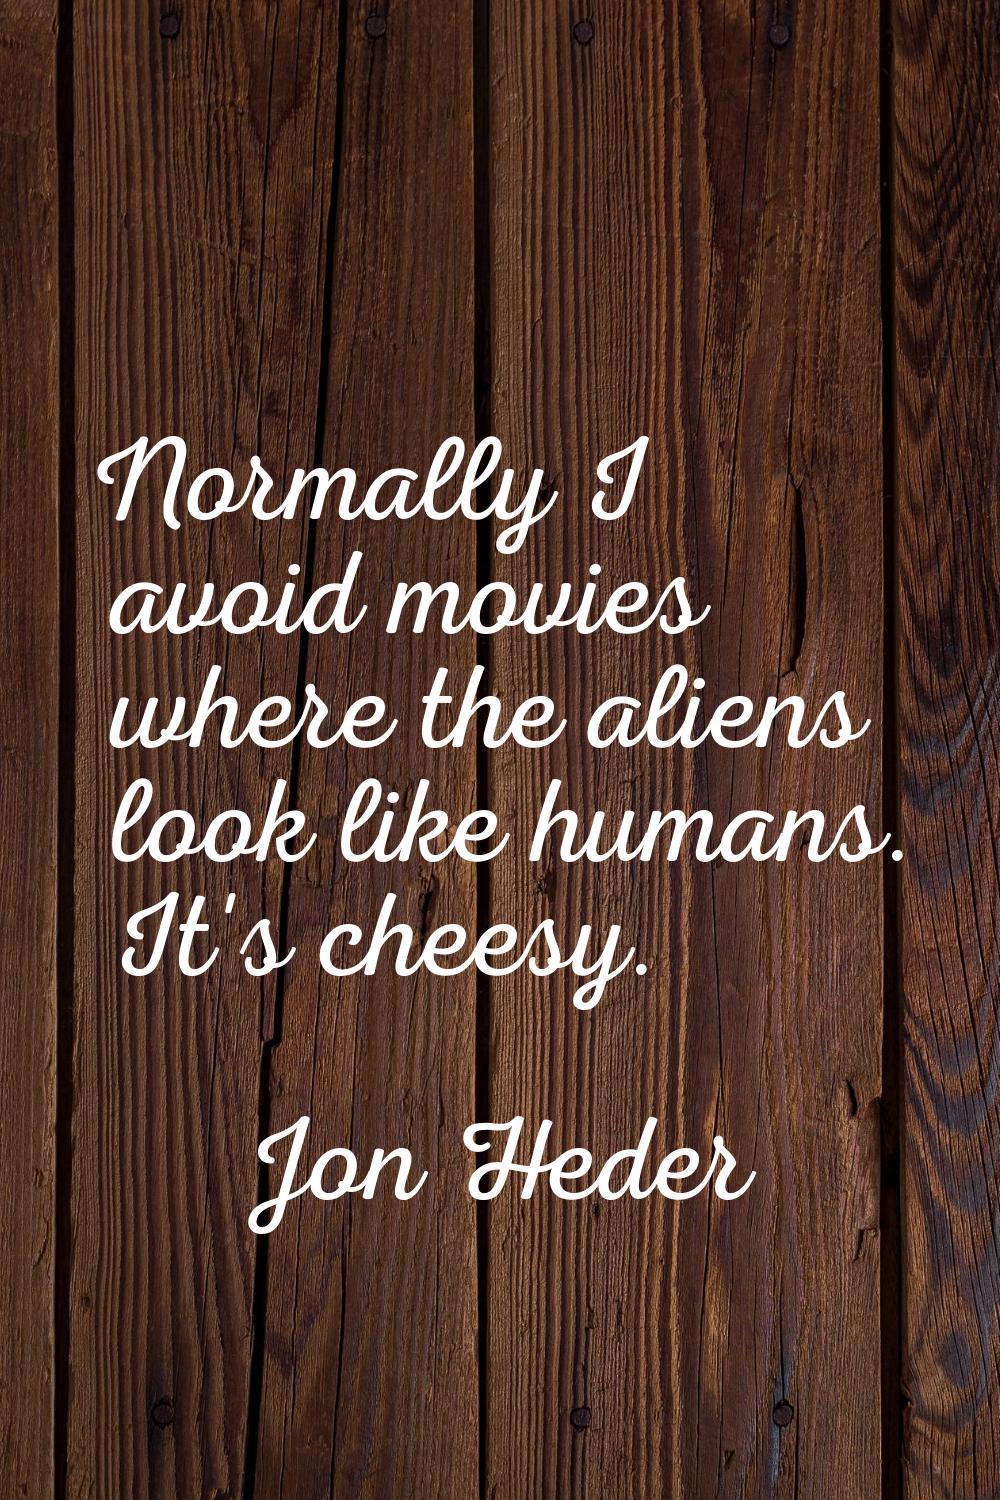 Normally I avoid movies where the aliens look like humans. It's cheesy.